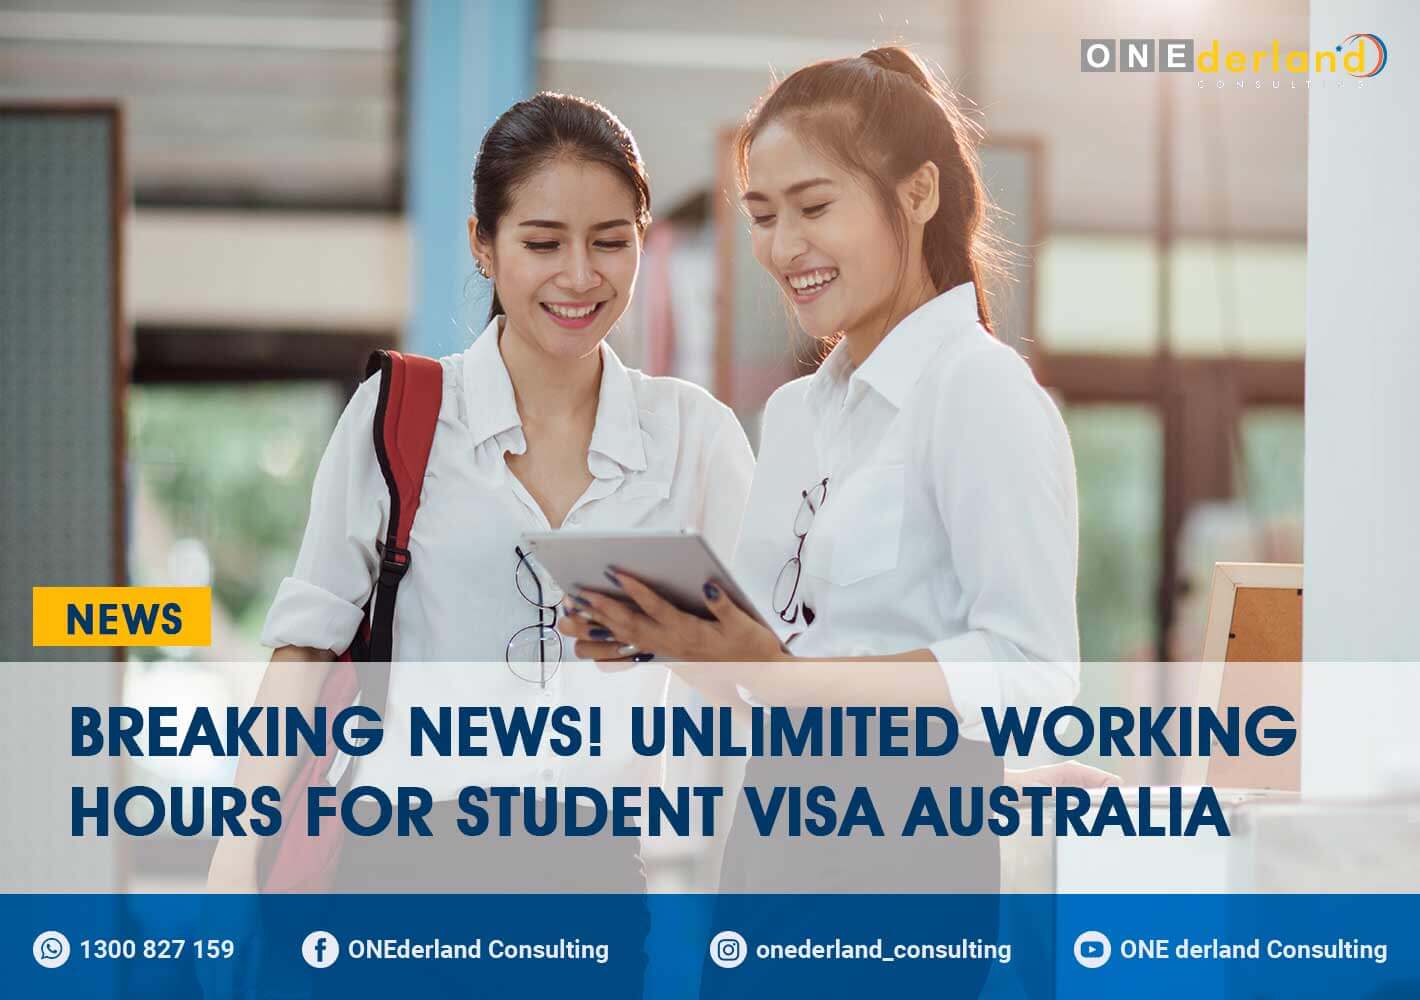 Australian Government Lifts the Limitation of Working Hours for Student Visa Holders